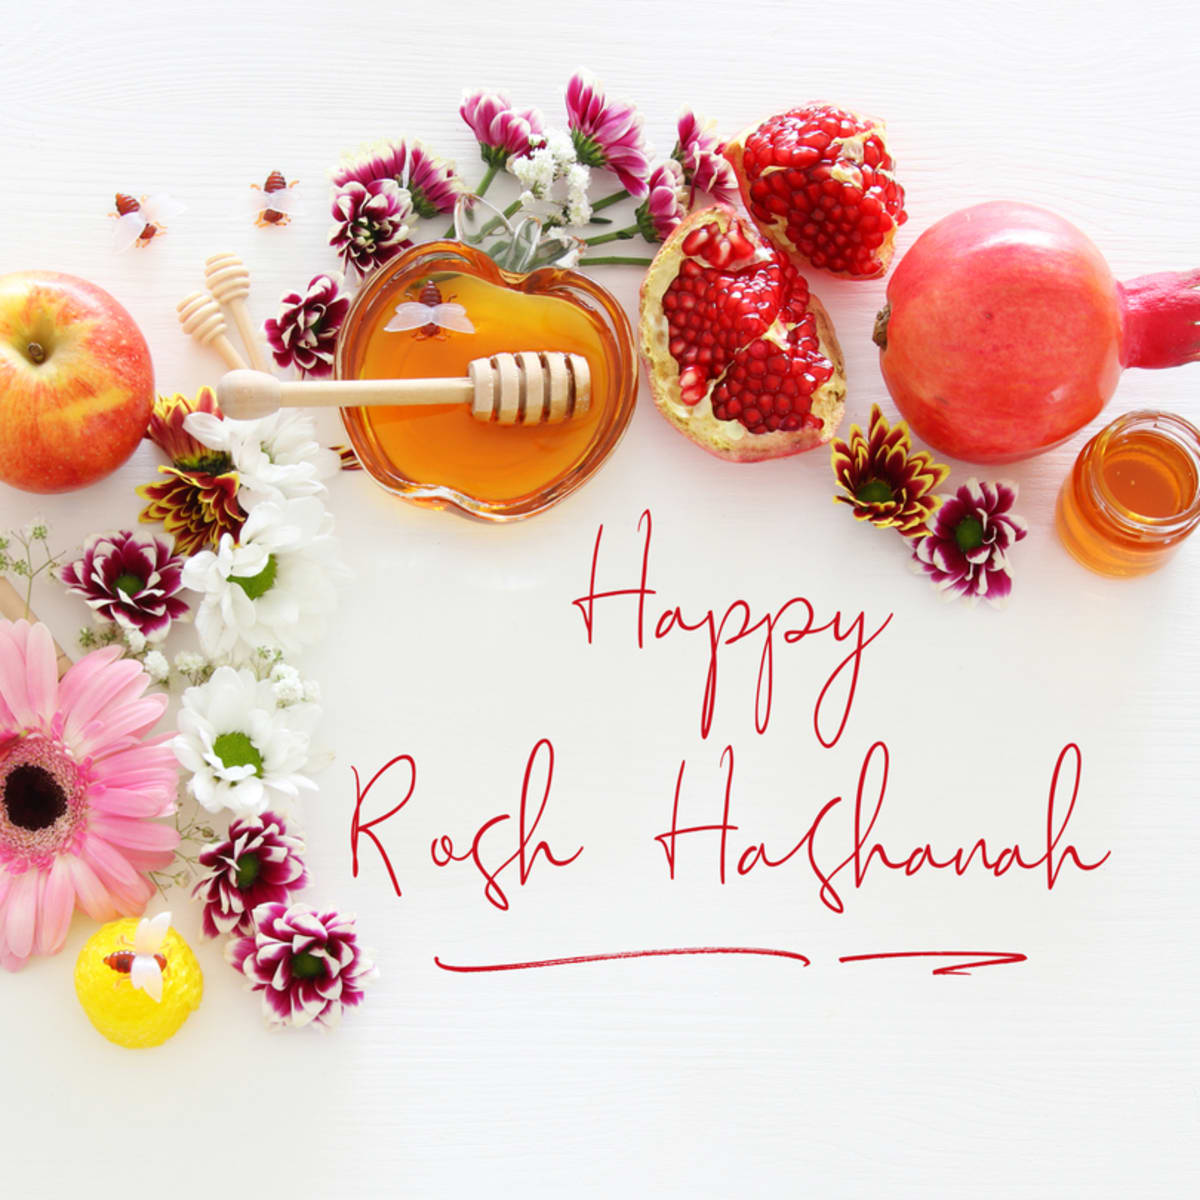 Happy Rosh Hashanah with holiday flowers and fruit.